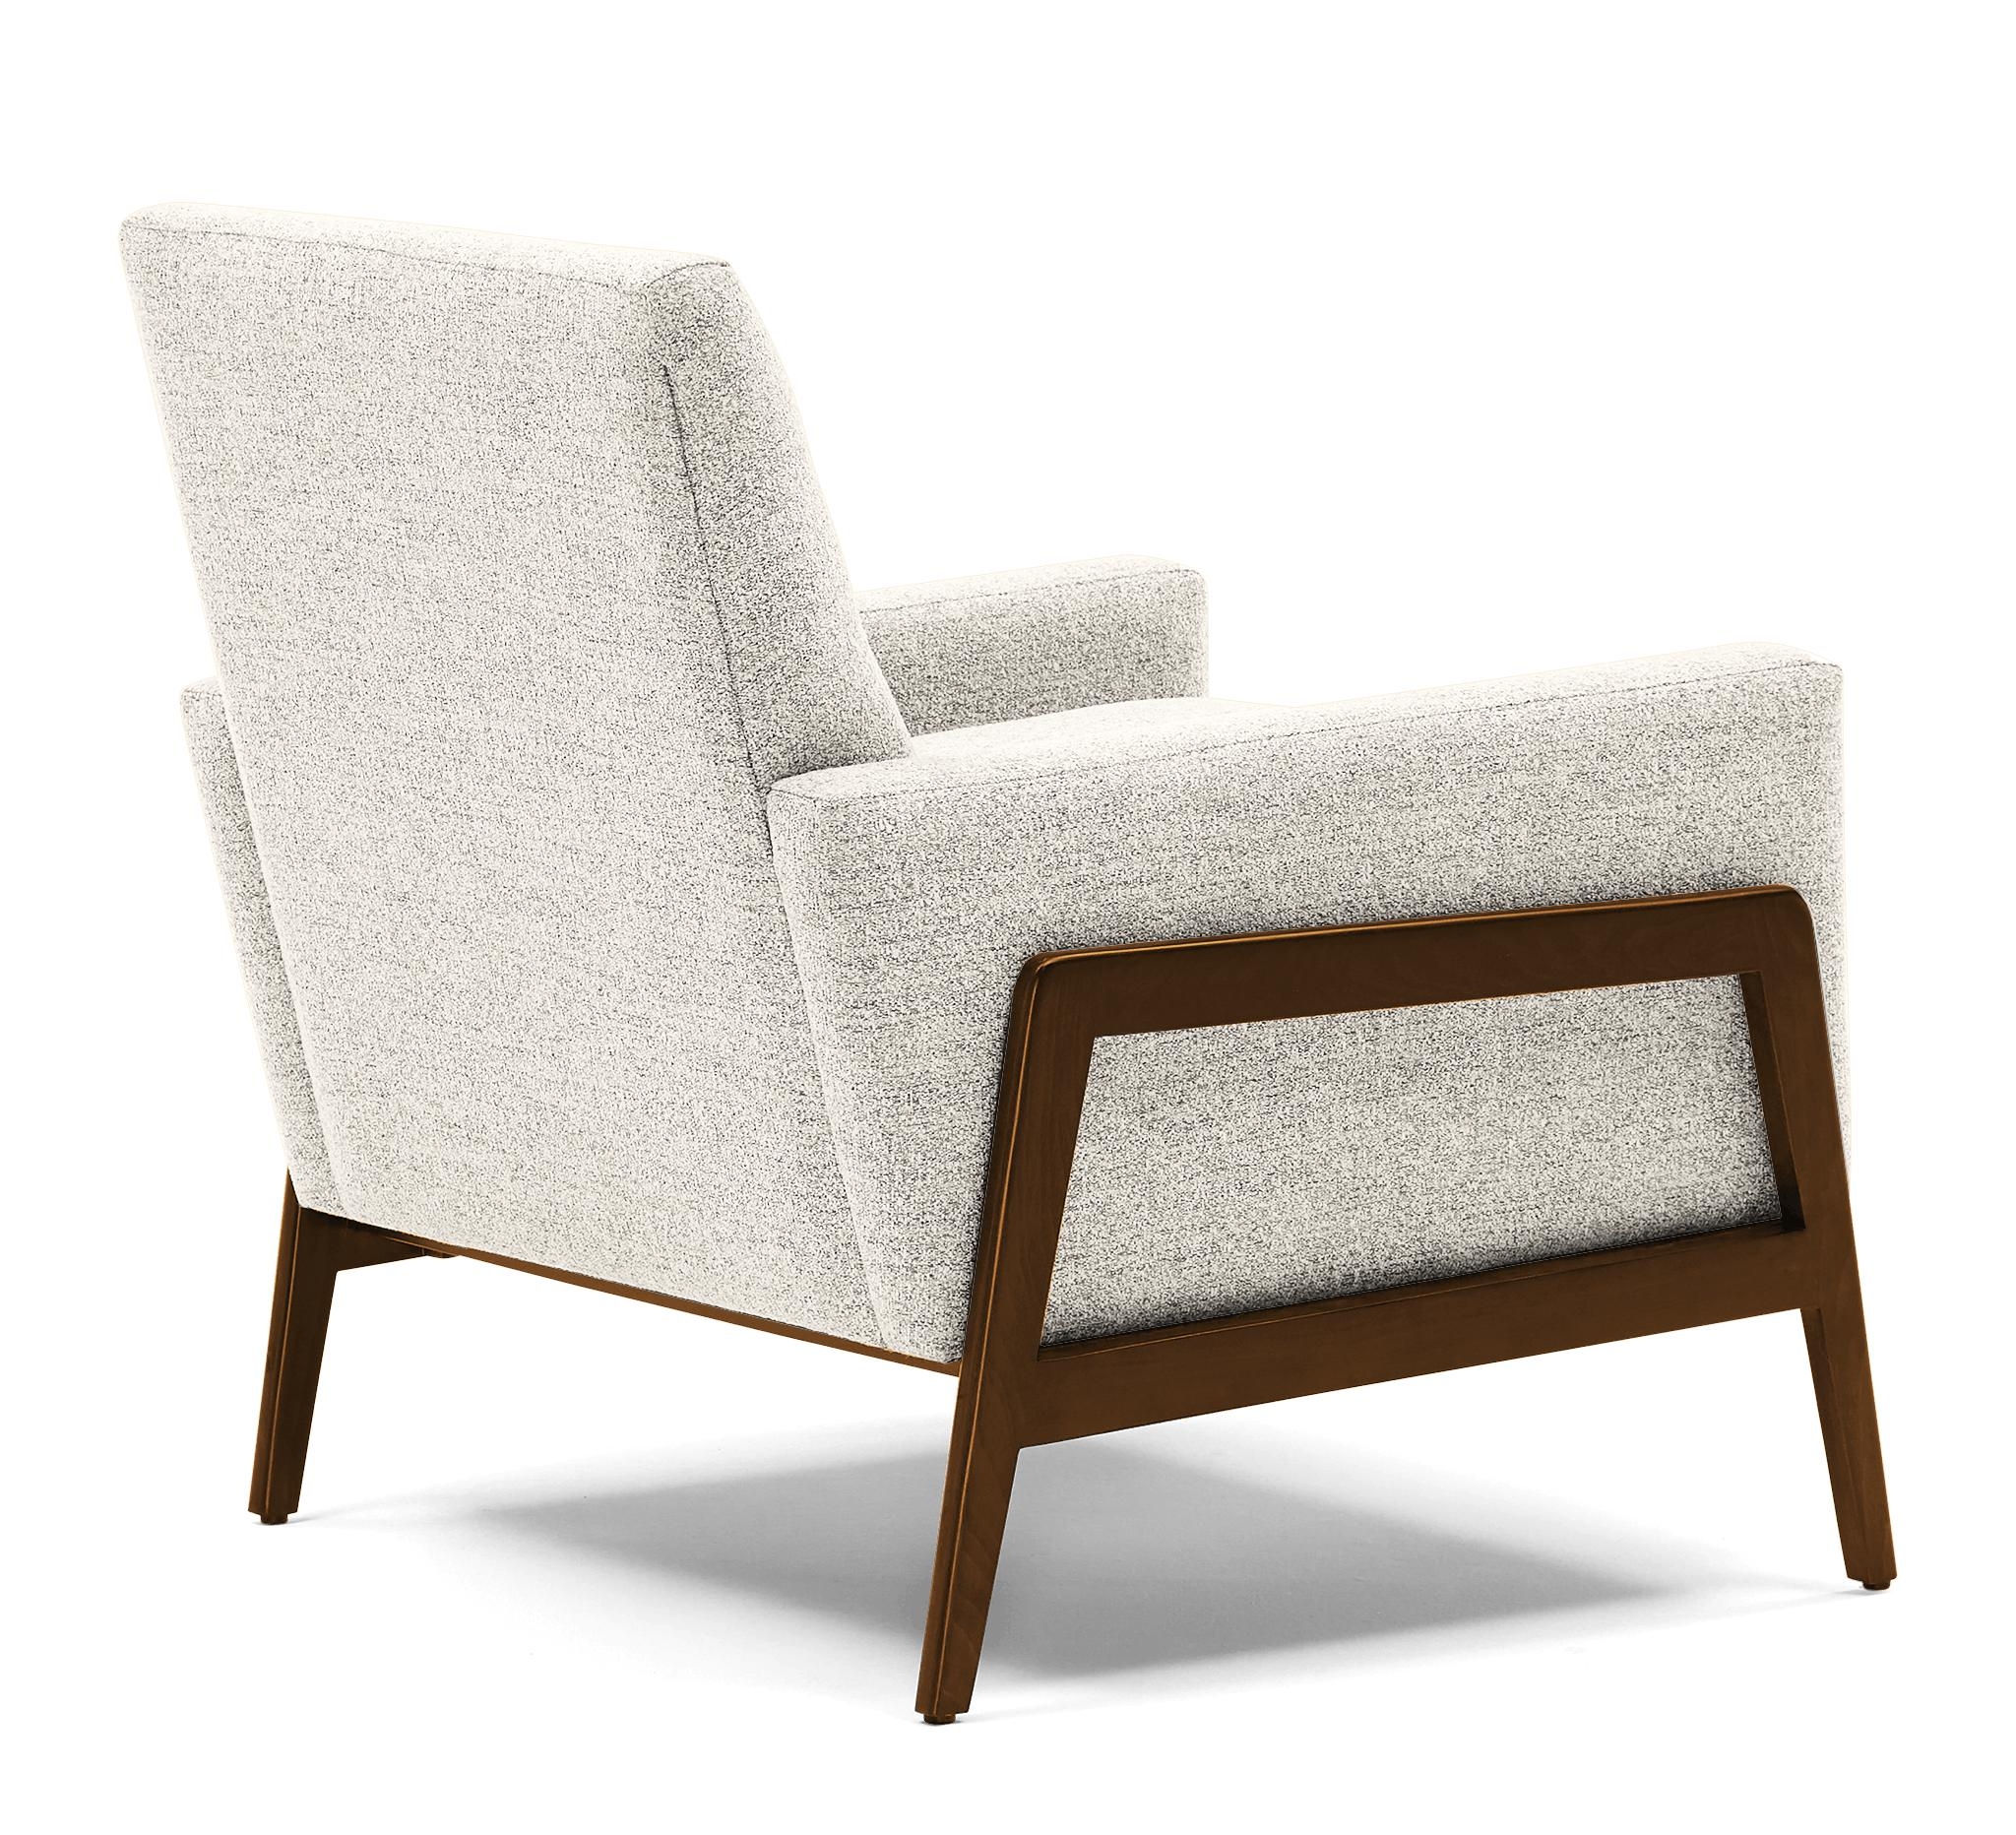 White Clyde Mid Century Modern Chair - Tussah Snow - Mocha - Image 3